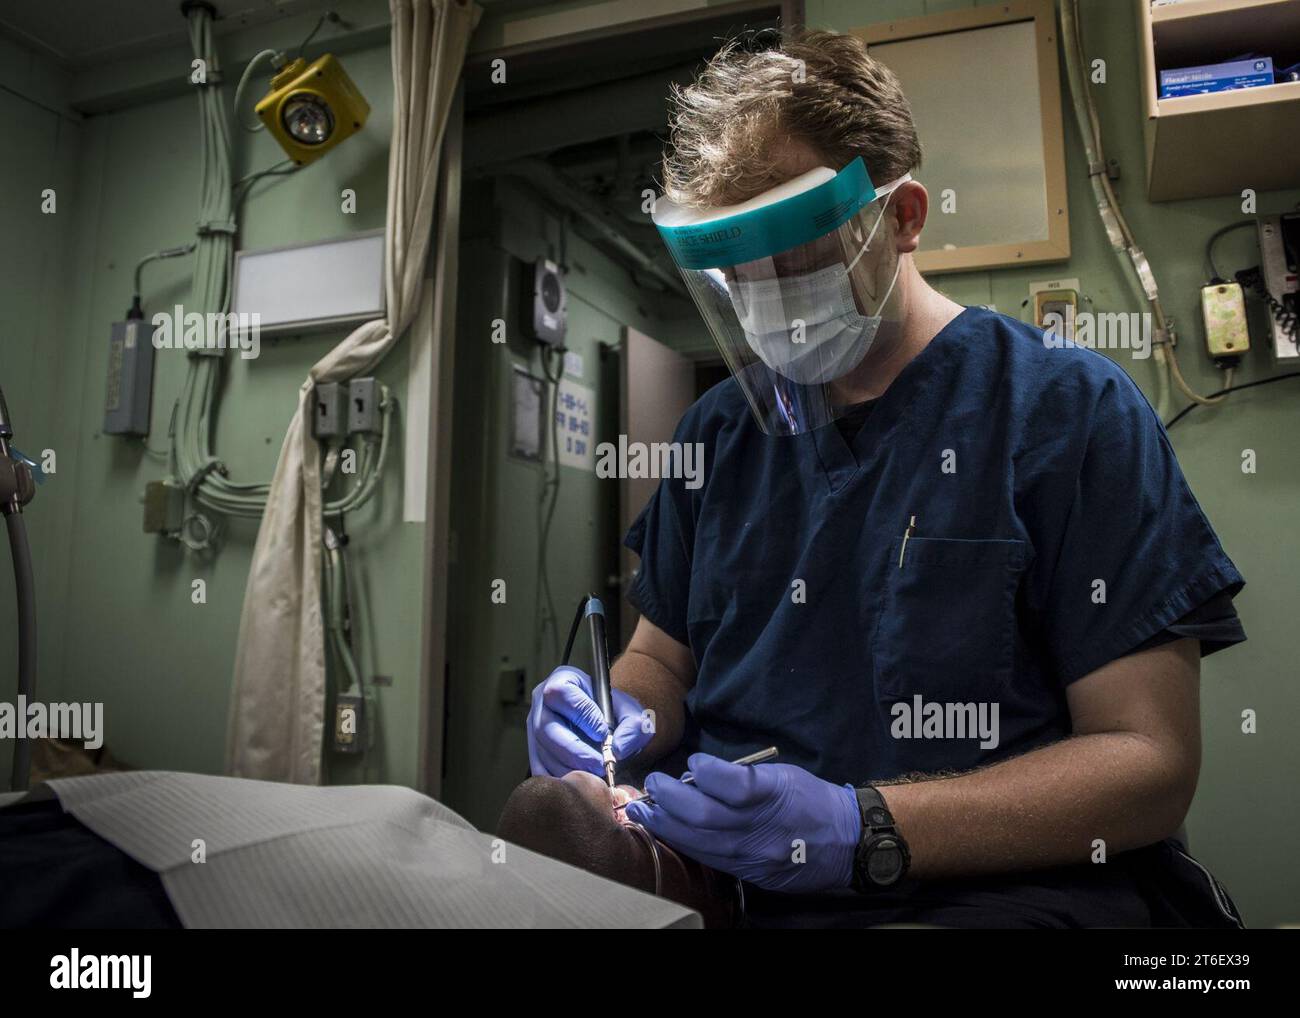 USS New Orleans Dental Cleaning (26893225940) Stock Photo